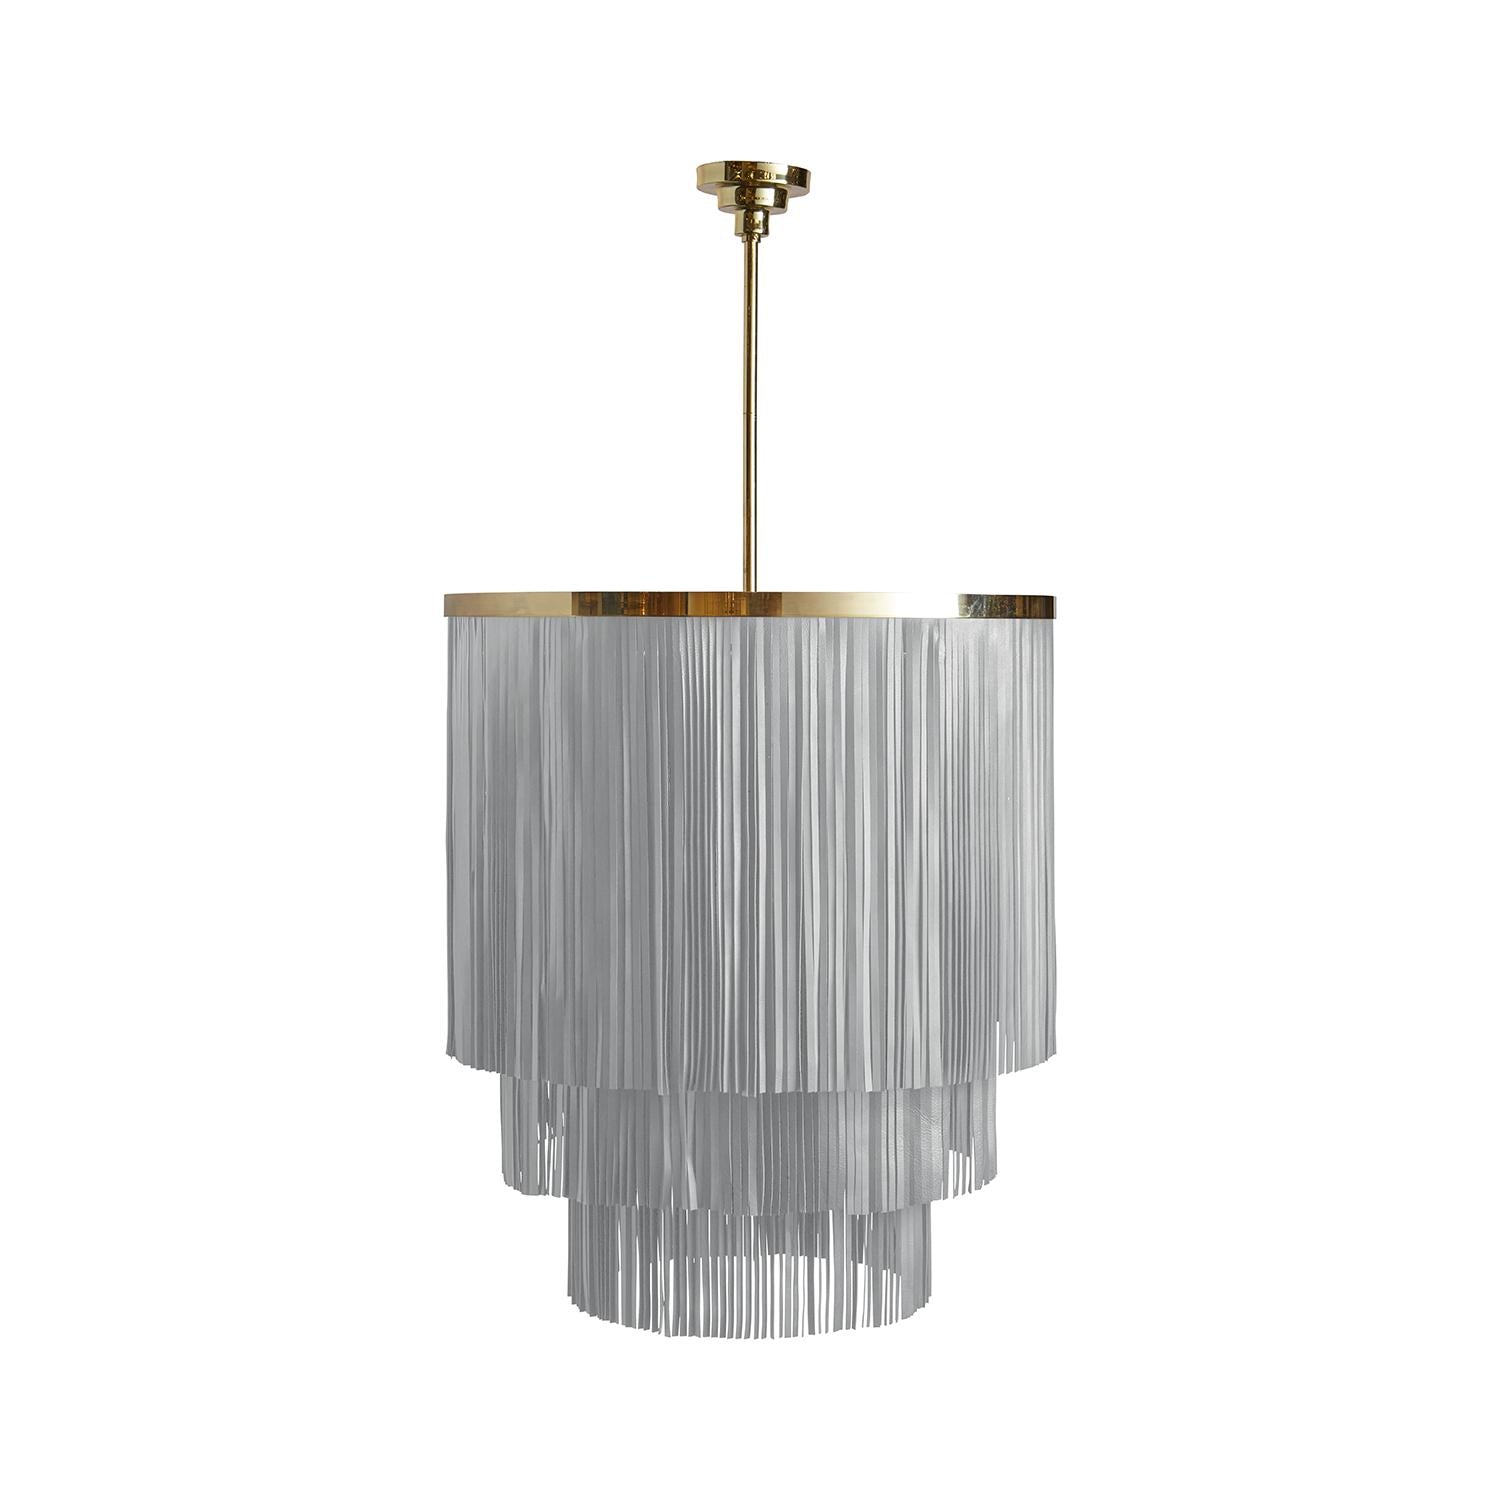 Small NeKeia Leather Chandelier in Brass Finish and Metallic Leather